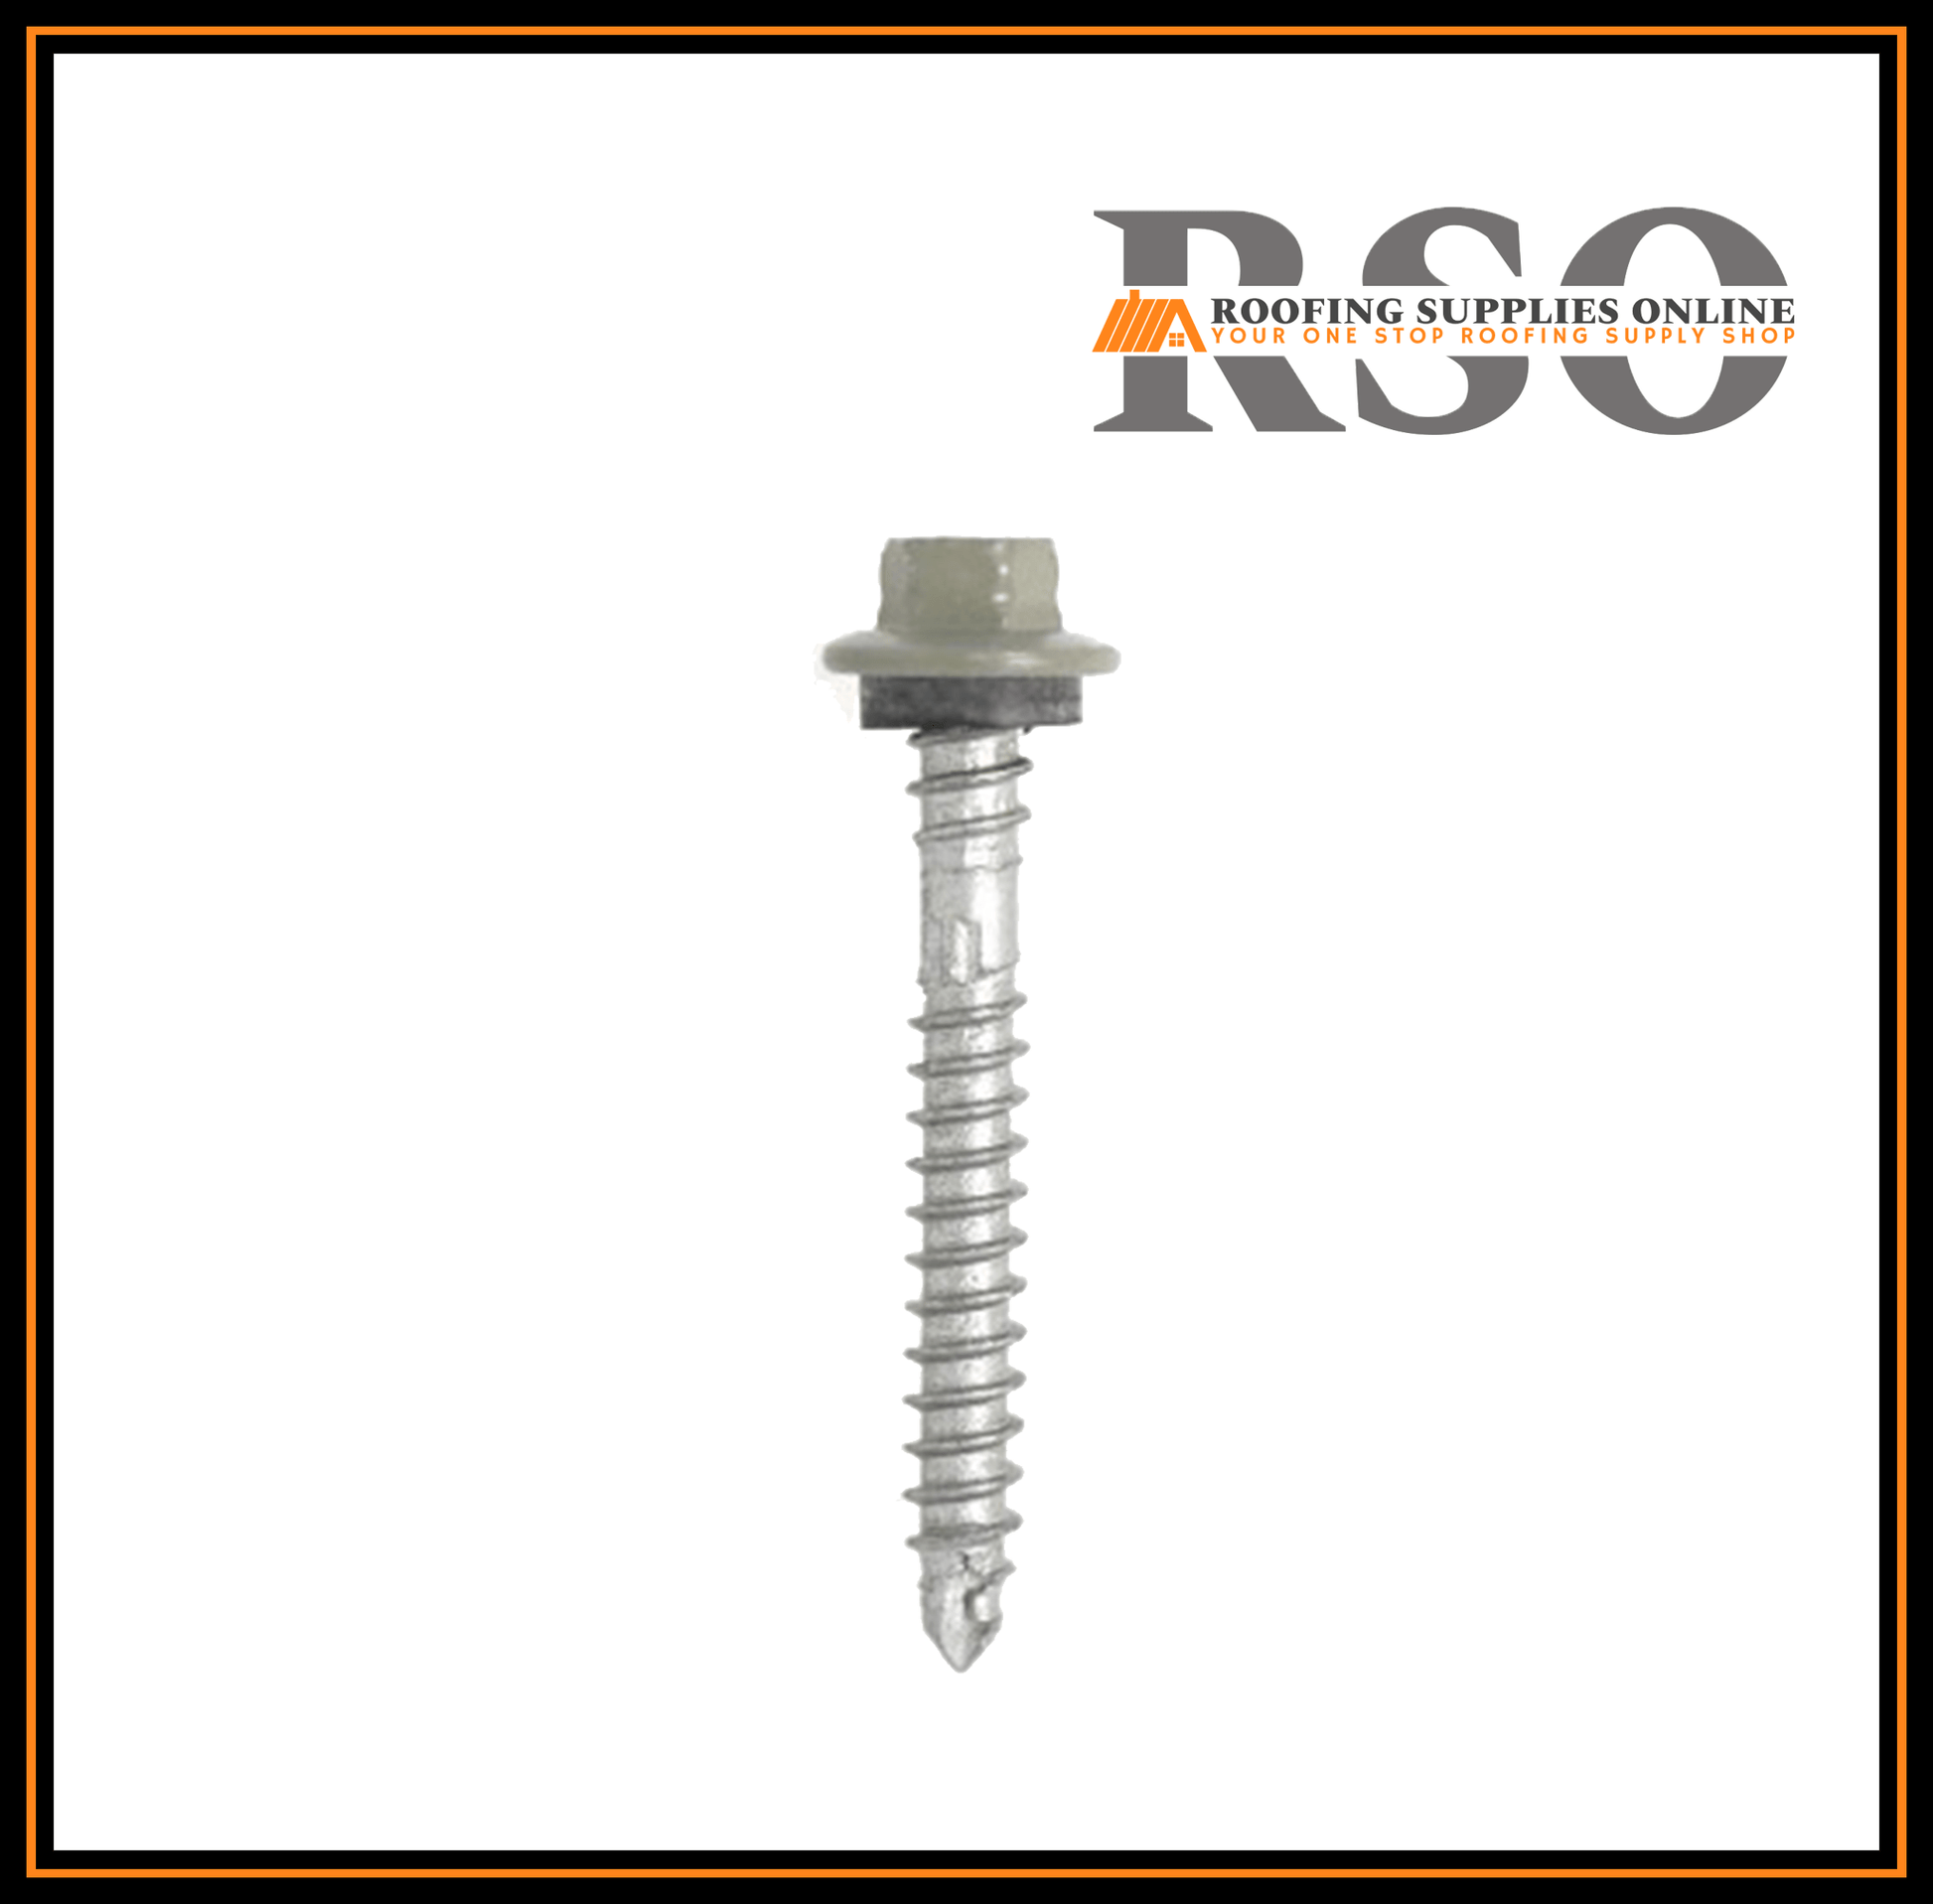 This image is of a 50mm HEX Zip cut roof screw with a neoprene seal and has a cutting head that is suilted for fixing to timber or metal battens